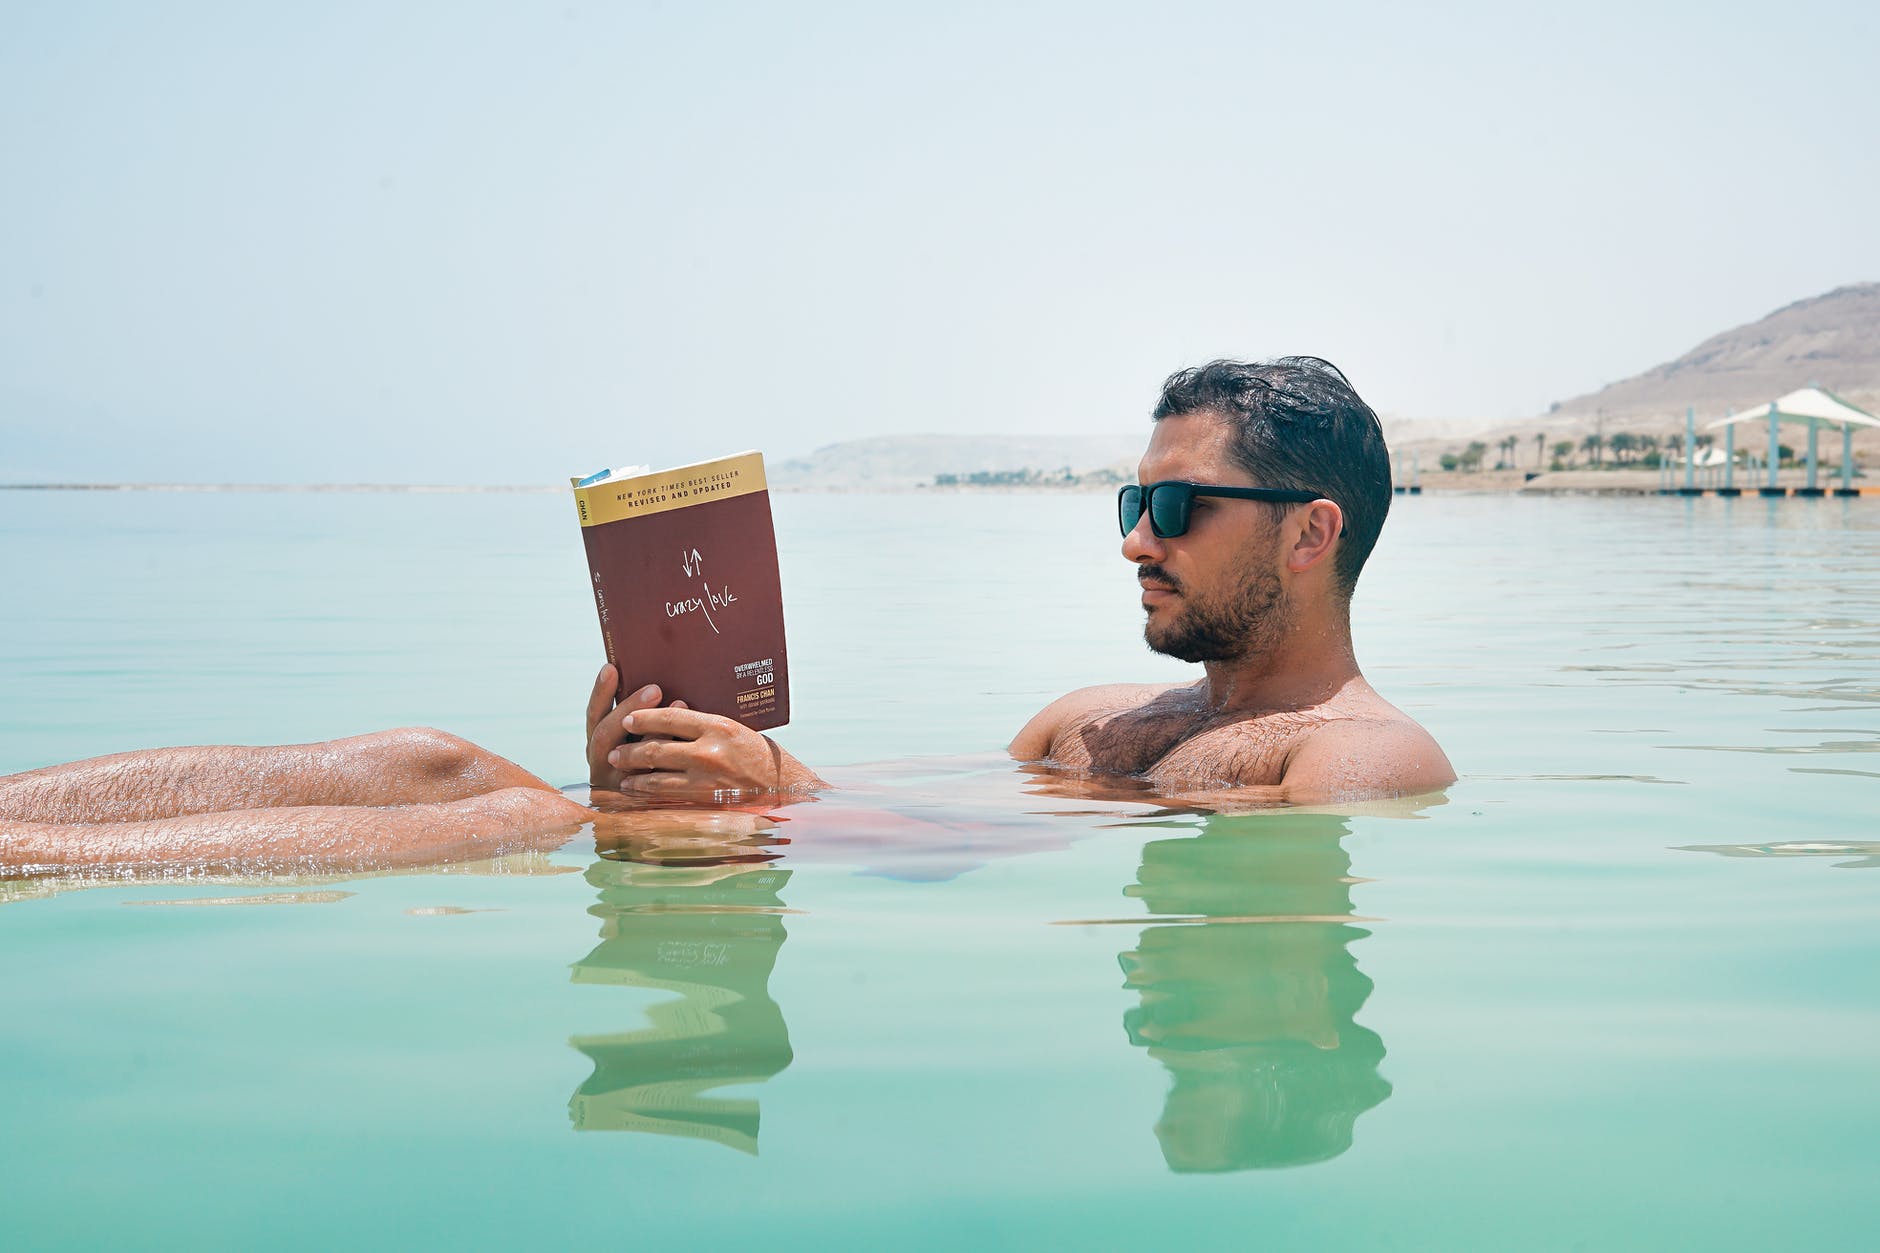 man wearing sunglasses reading book on body of water